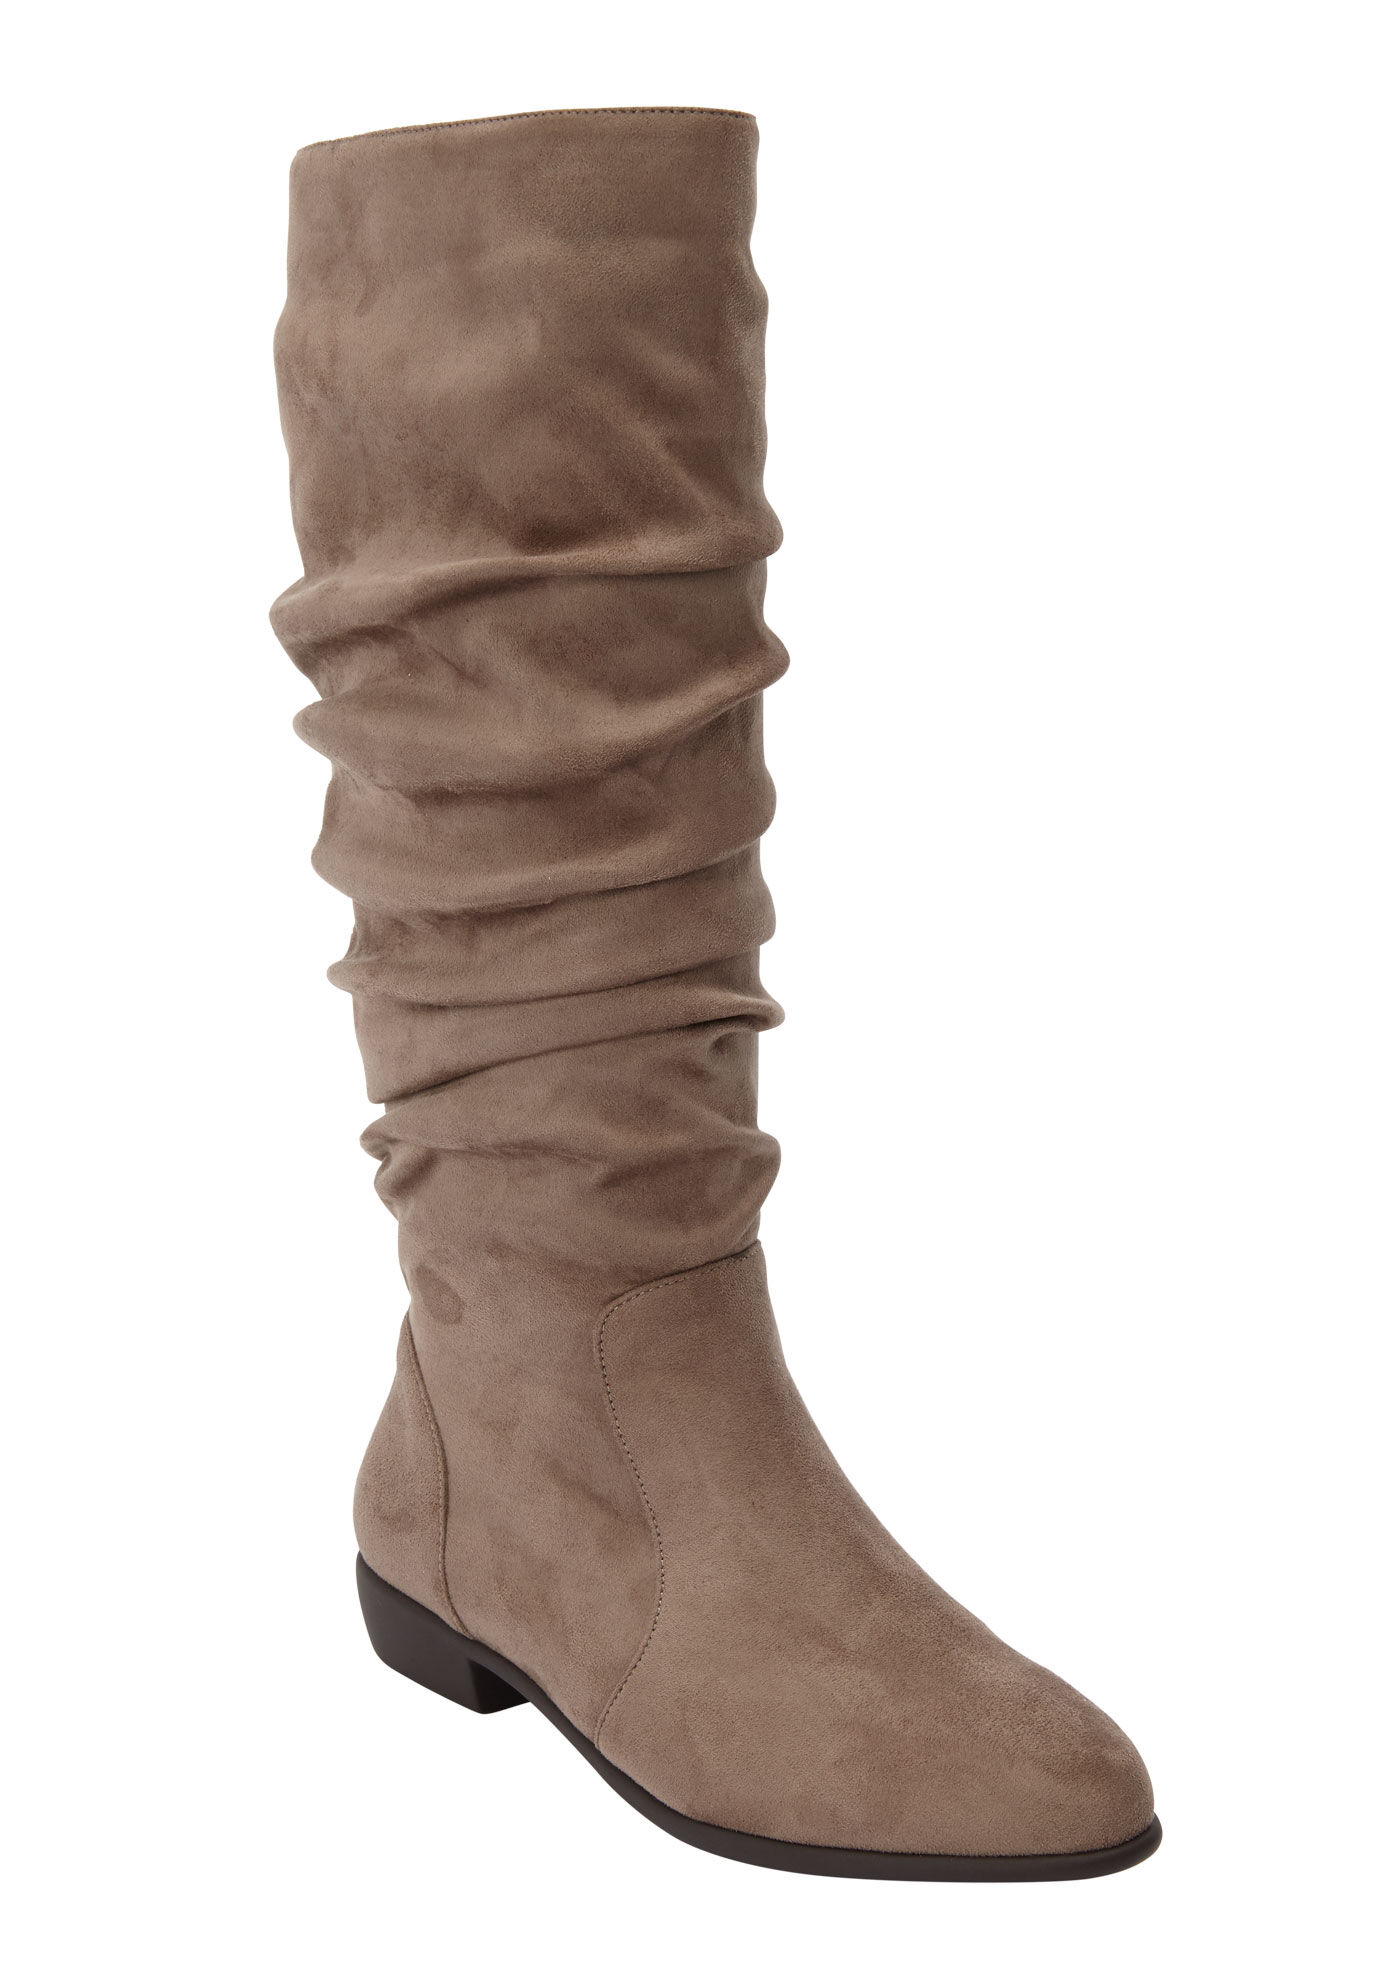 Wide \u0026 Extra Wide Calf Boots for Women 